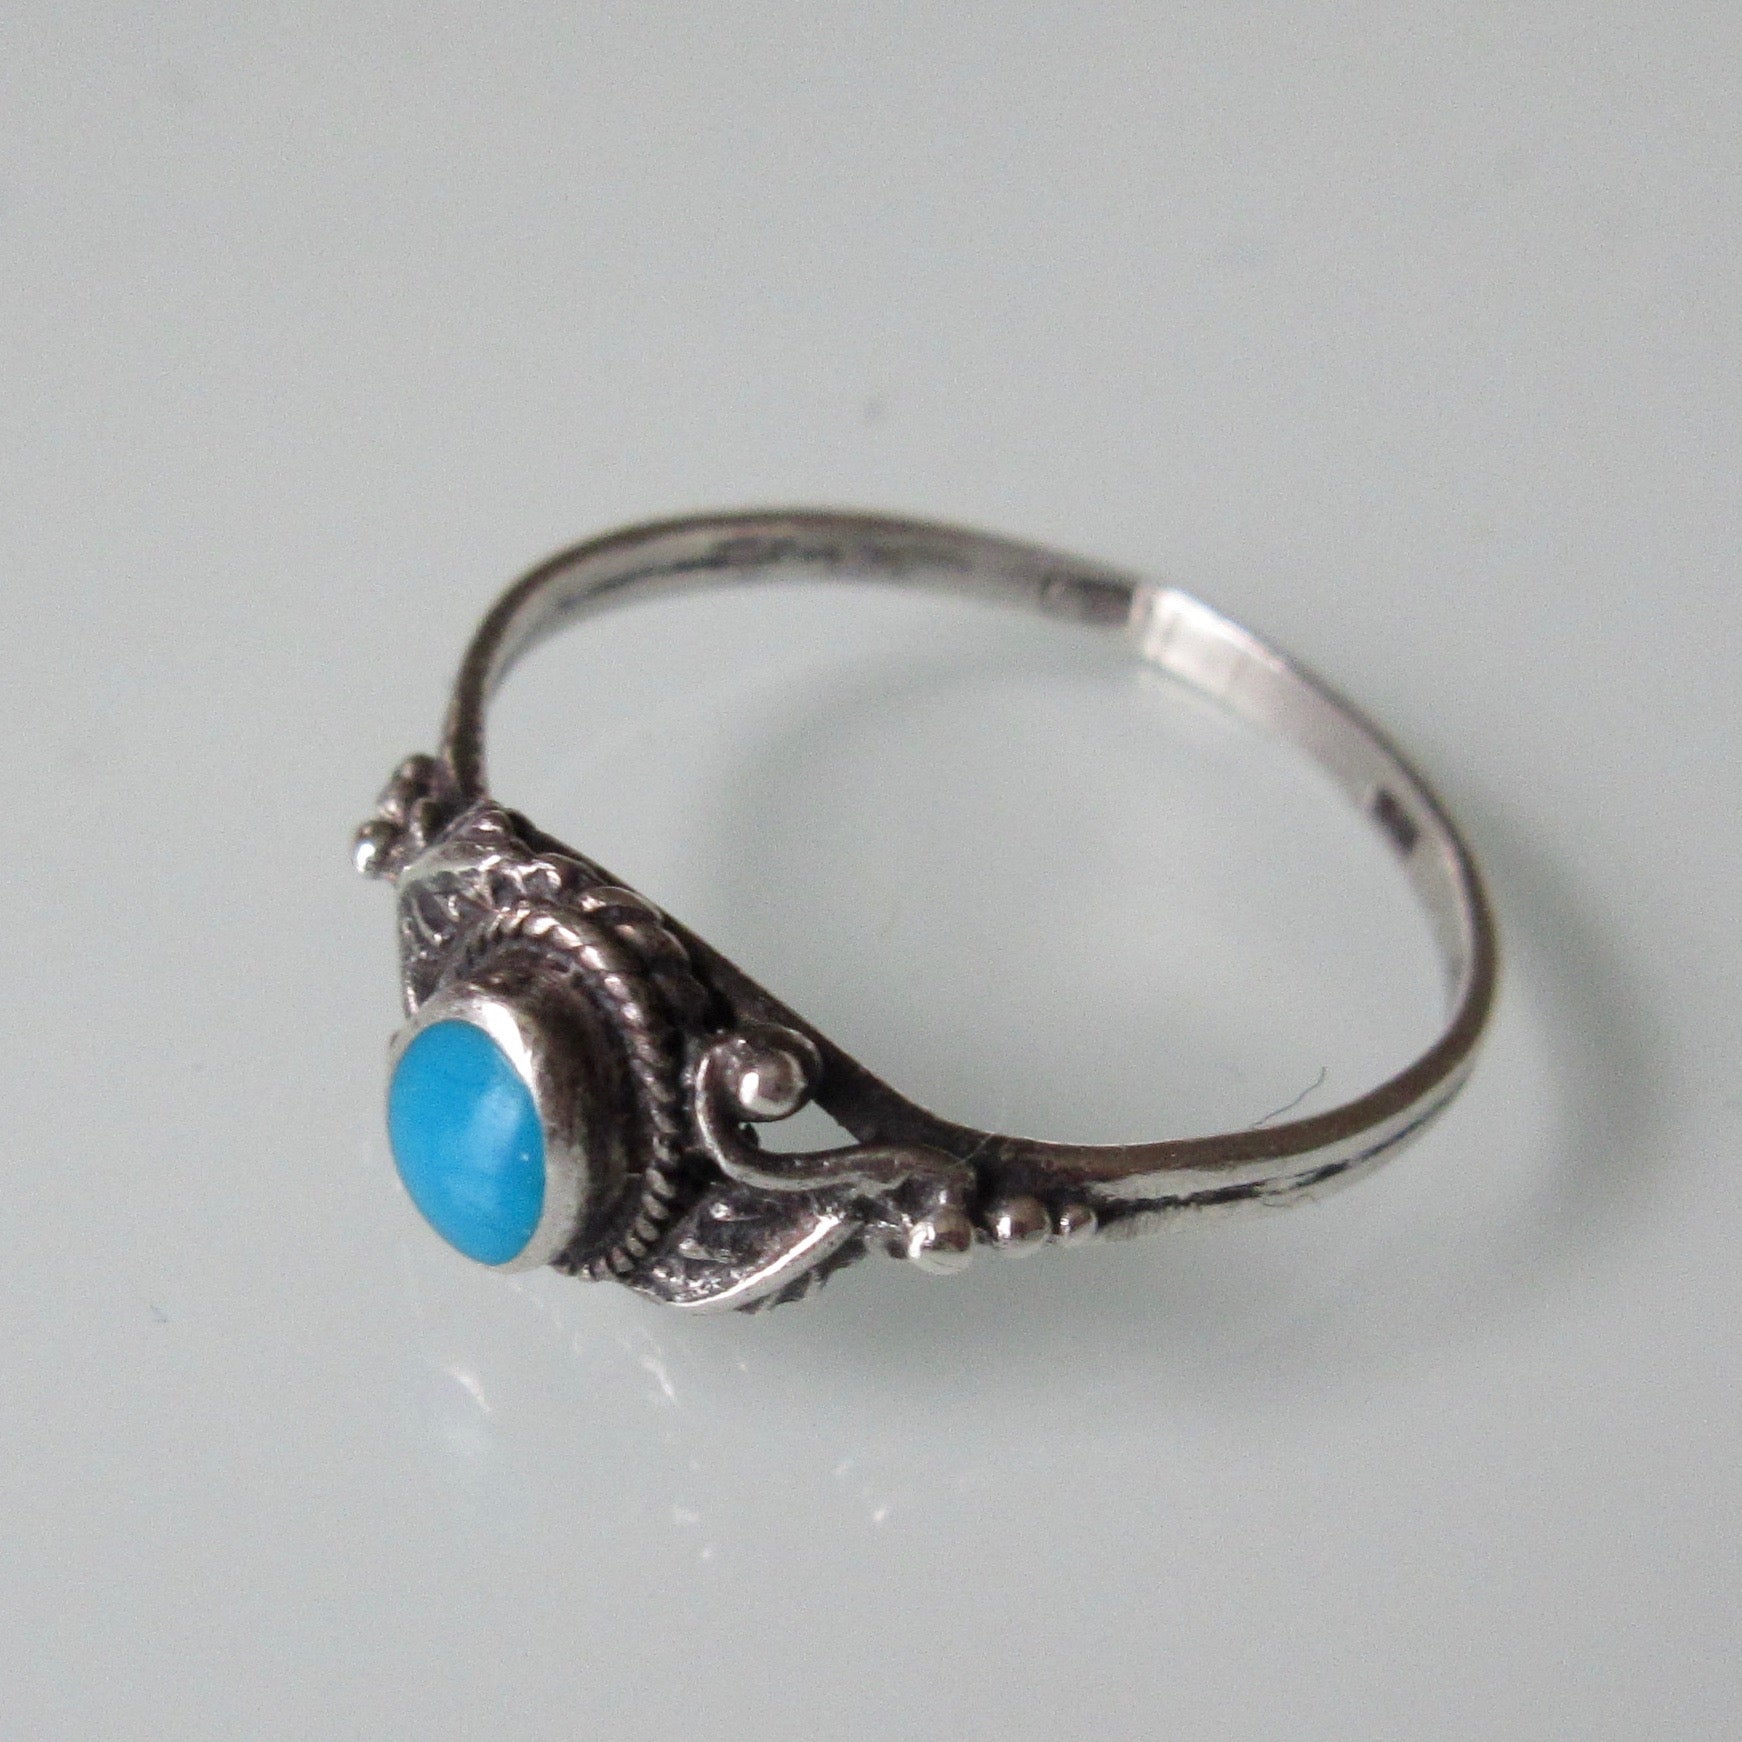 Delicate Navajo Turquoise Sterling Silver Ring